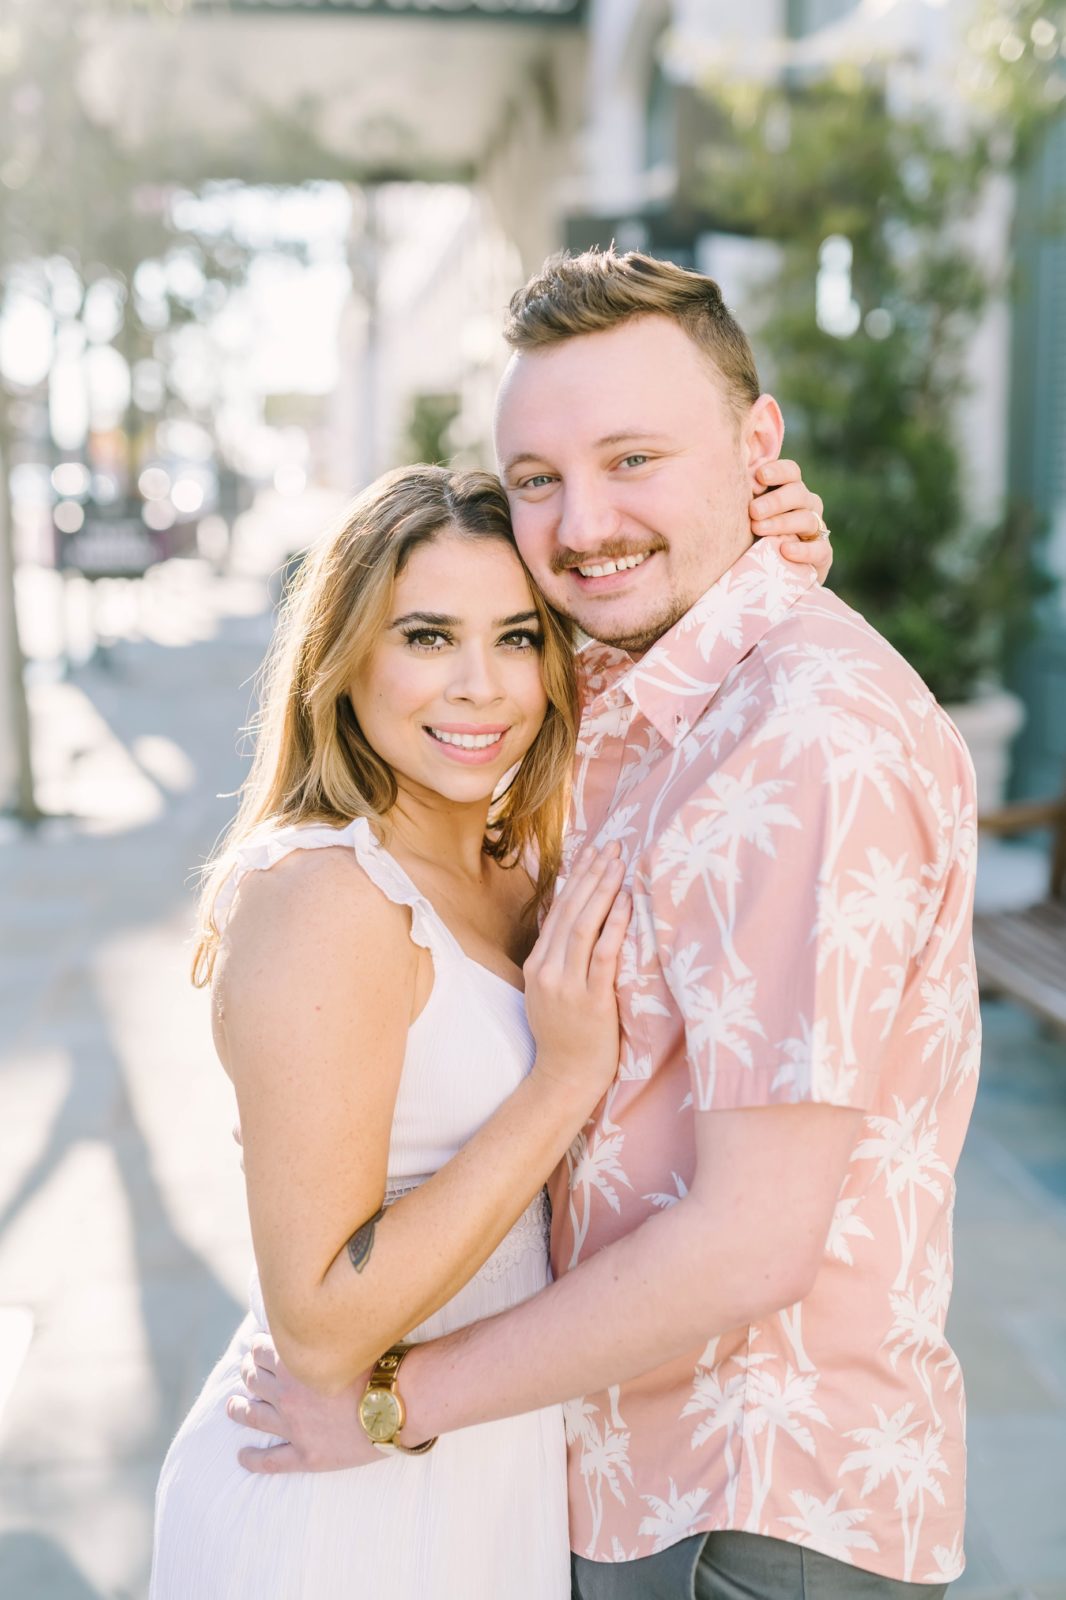 Summer engagement portraits with woman wearing white dress and man wearing pink button-up by Christina Elliott Photography. summer engagements #ChristinaElliottPhotography #ChristinaElliottEngagements #TheTremontHouse #Texasengagements #shesaidyes